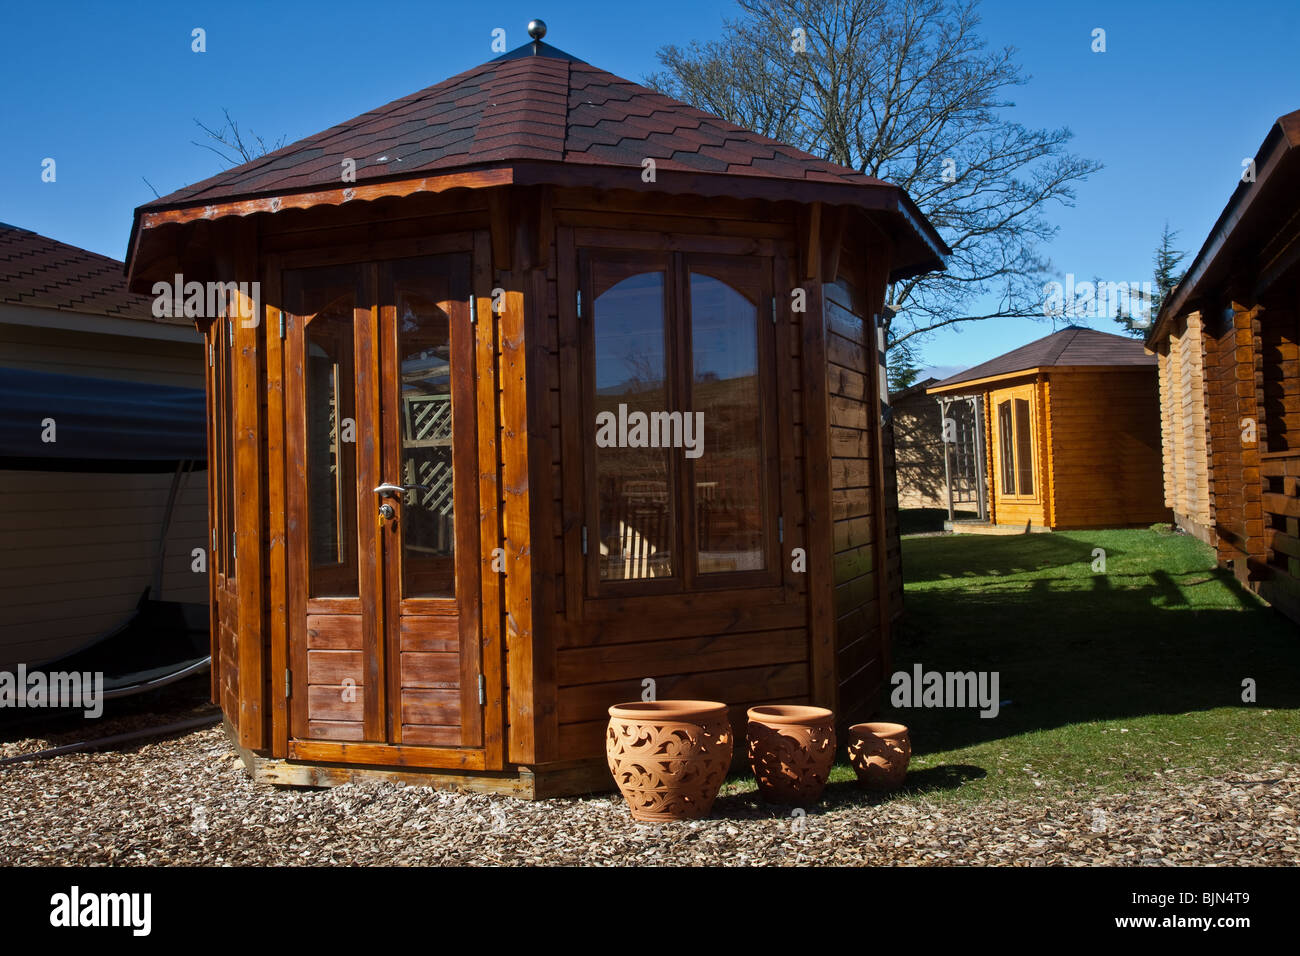 Garden Shed, Outbuilding, chalet, garden, house, architecture, summer, home, wood, nature, building, cottage, Summerhouse or Countryside Cabin, UK Stock Photo